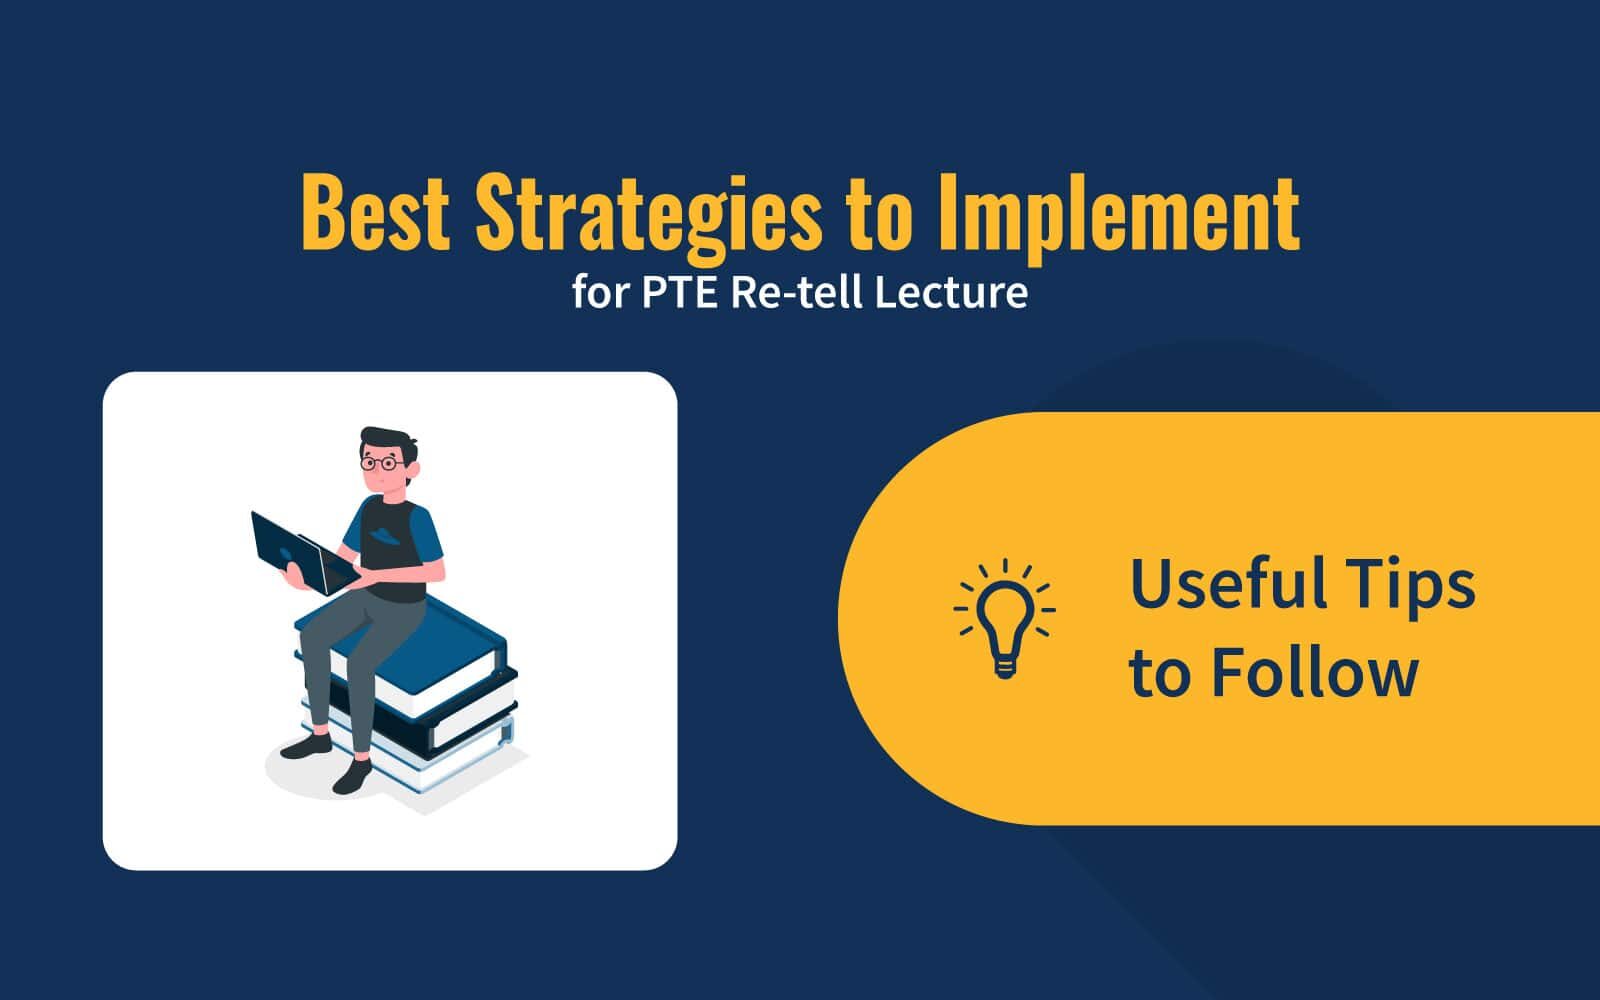 Best Strategies to Implement for PTE Re-tell Lecture